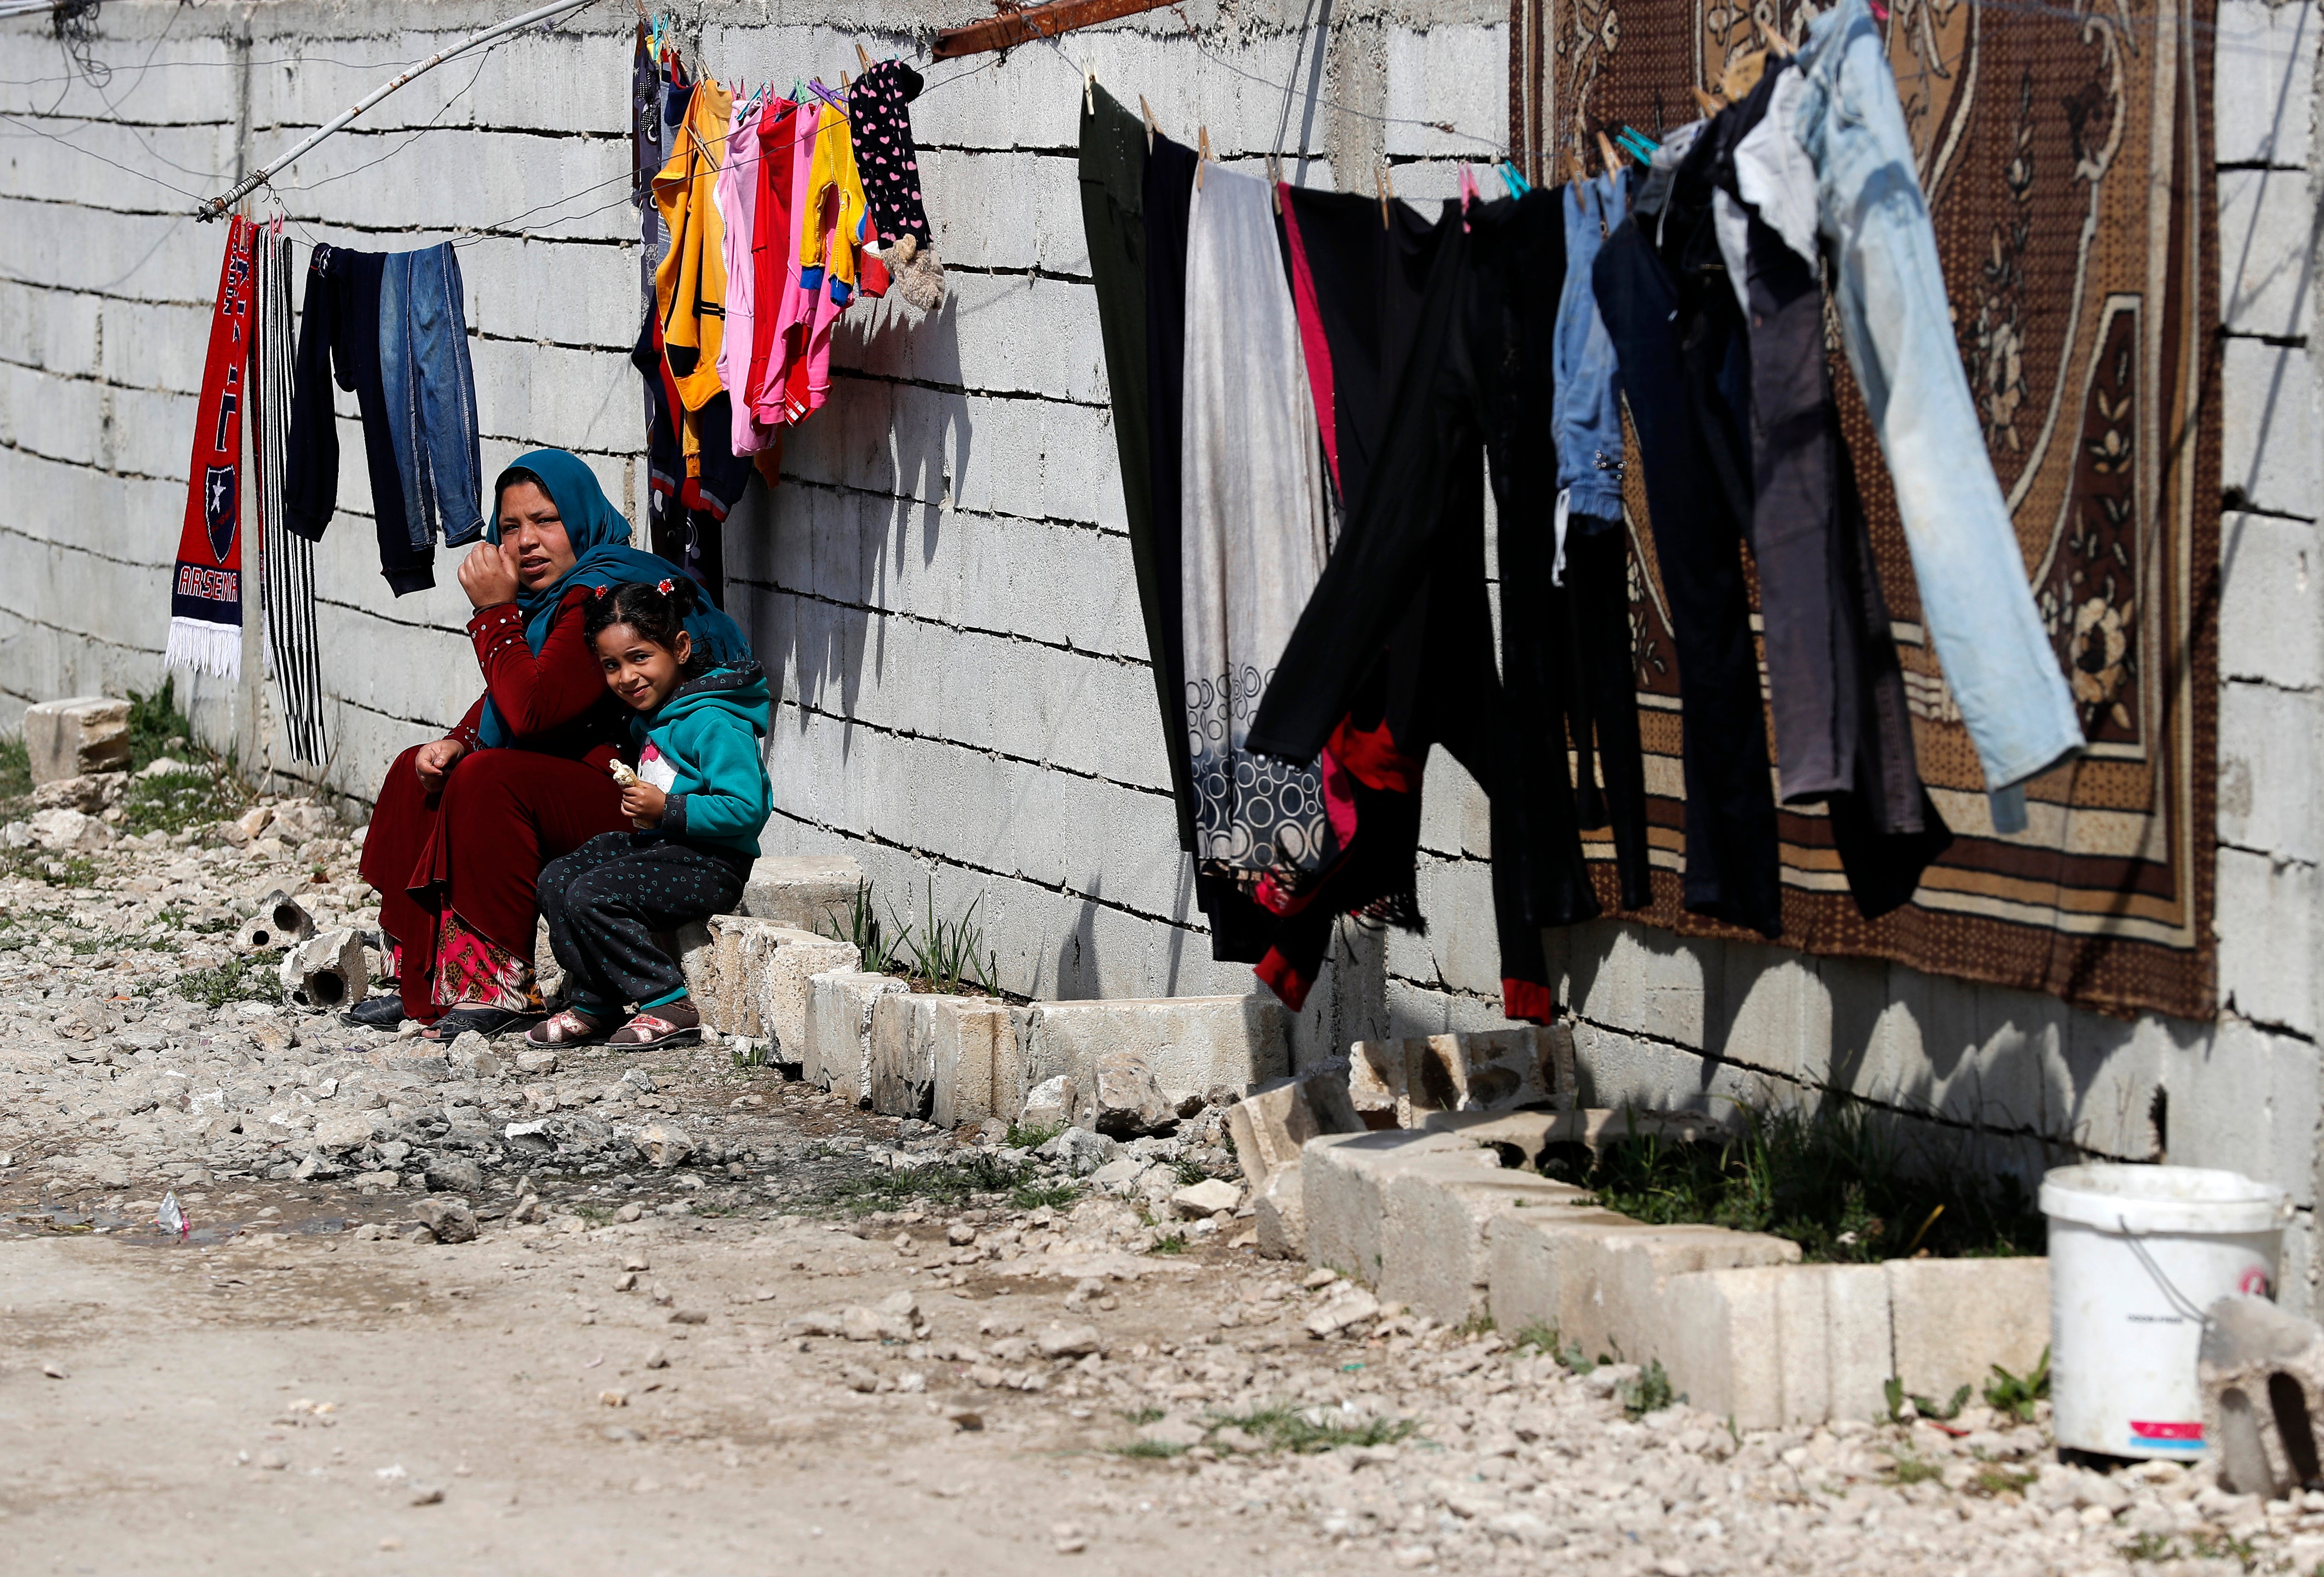 A displaced Syrian woman with her daughter at a refugee camp in Bar Elias, in eastern Lebanon's Bekaa Valley